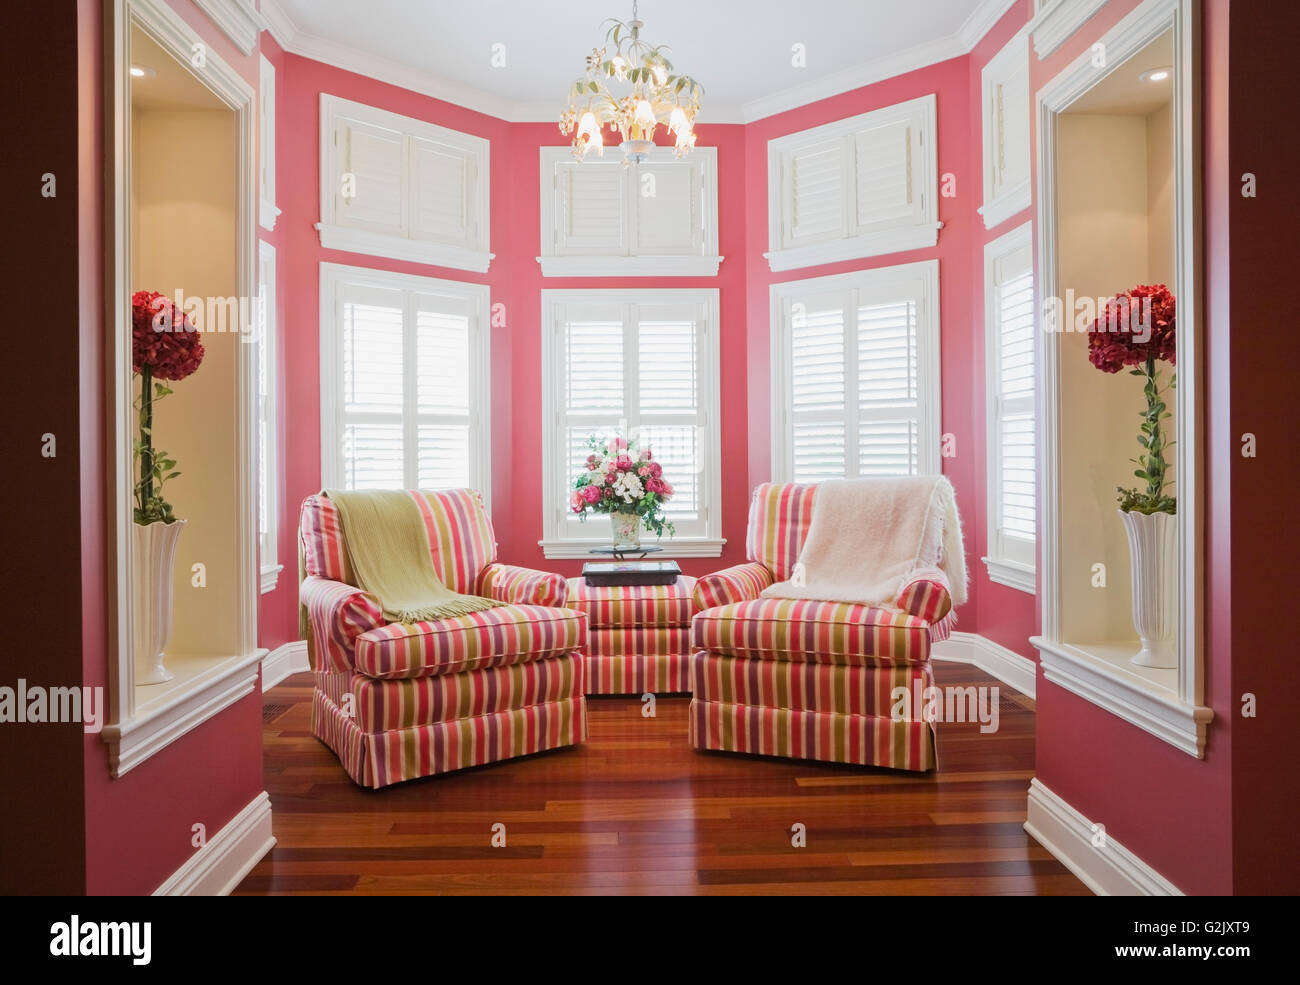 Pink green striped upholstered sitting chairs in alcove in master bedroom on upstairs floor inside elegant cottage style home Stock Photo